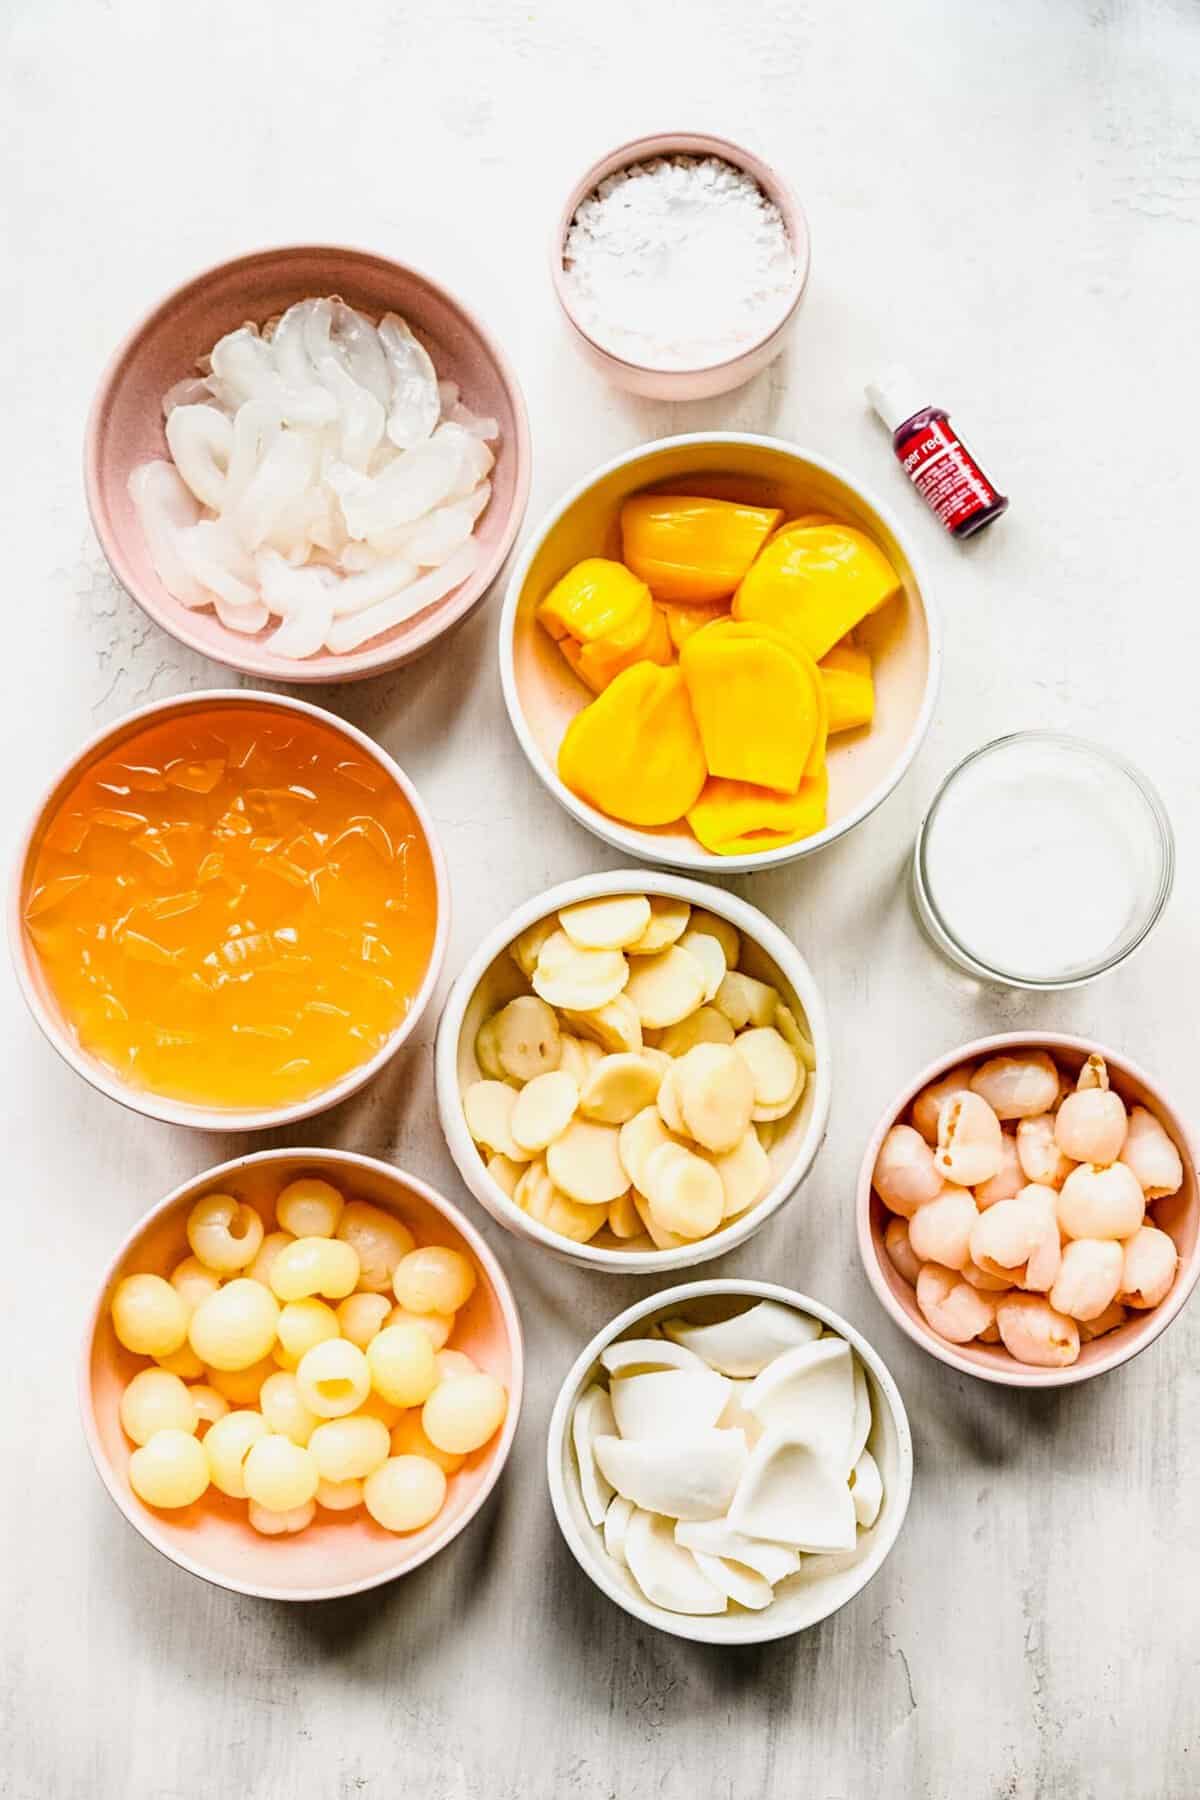 Ingredients for Chè Thái seperated into individual bowls.